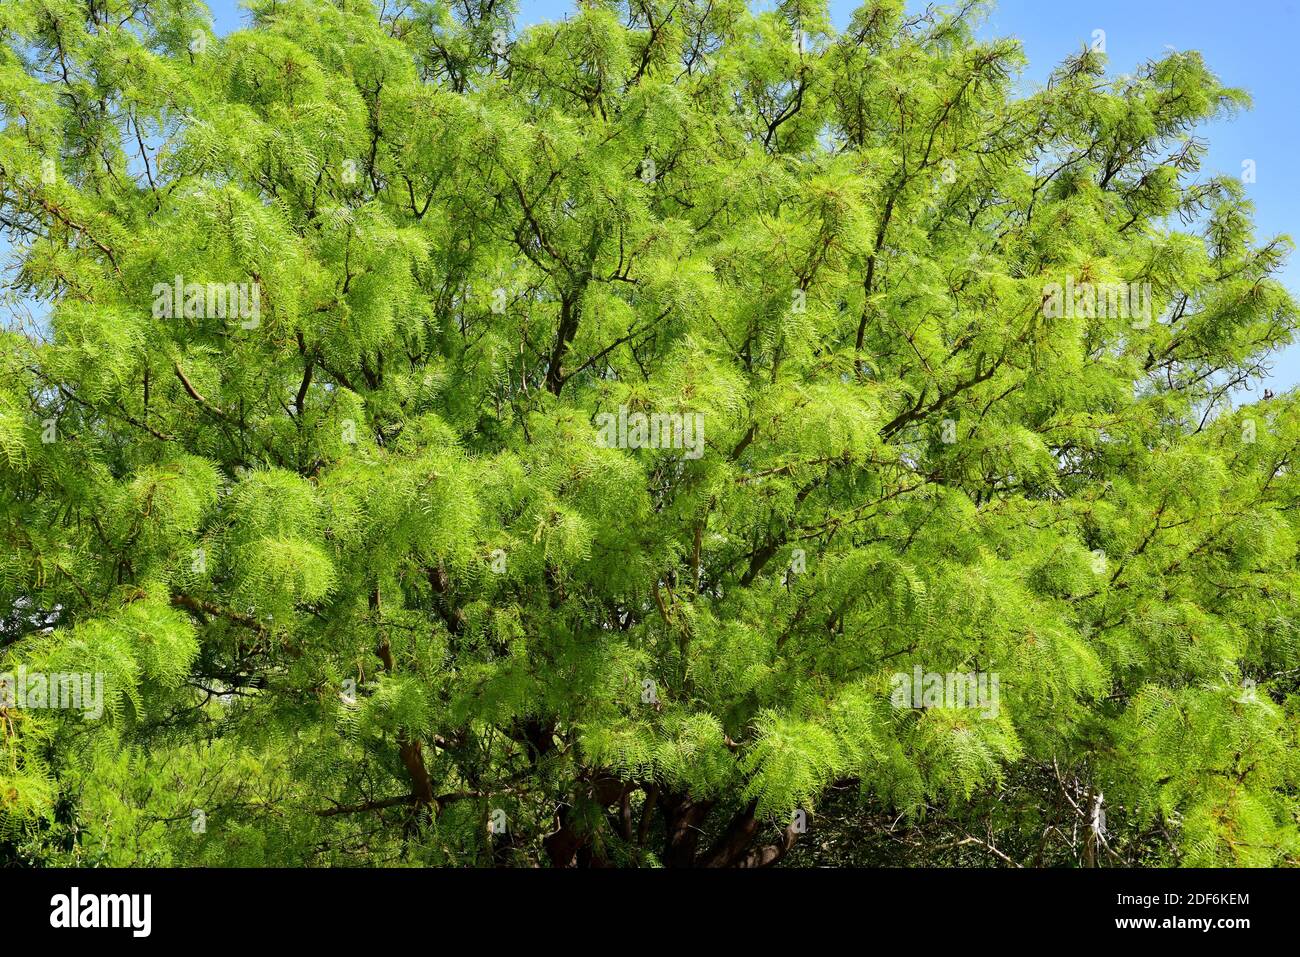 Chilean algarrobo or chilean mesquite (Prosopis chilensis) is a deciduoud tree native to Chile, Argentina and Peru. Stock Photo